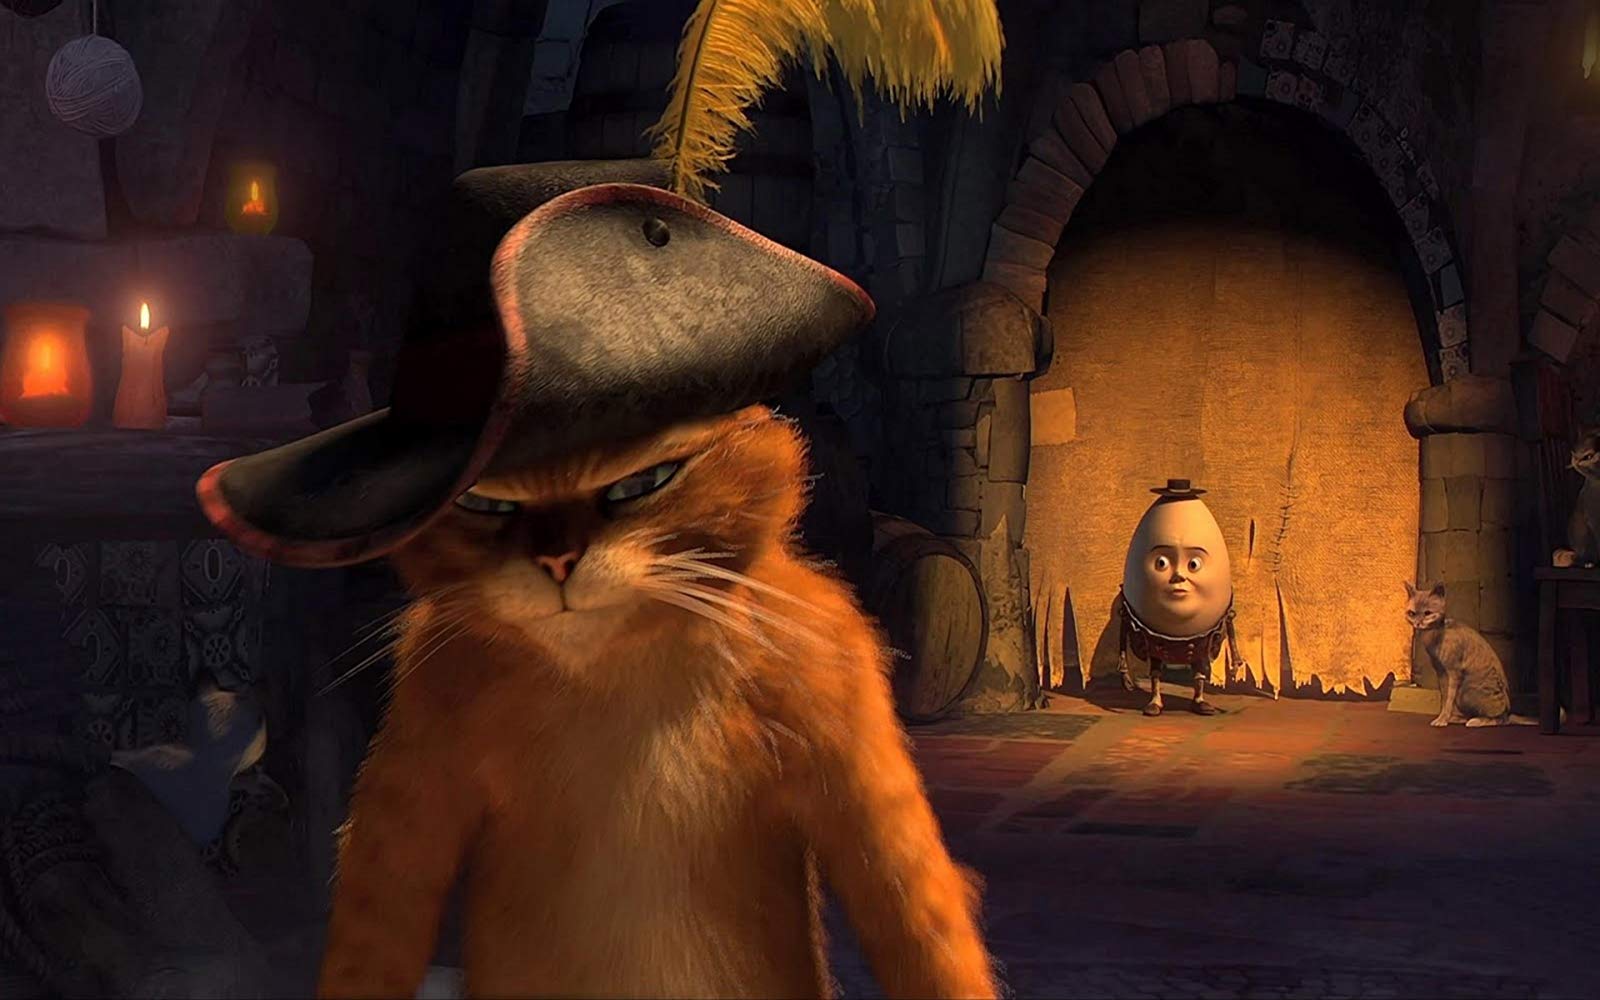 Puss in Boots (voiced by Antonio Banderas) with Humpty Dumpty (voiced by Zach Galifianakis) in the background in Puss in Boots (2011)